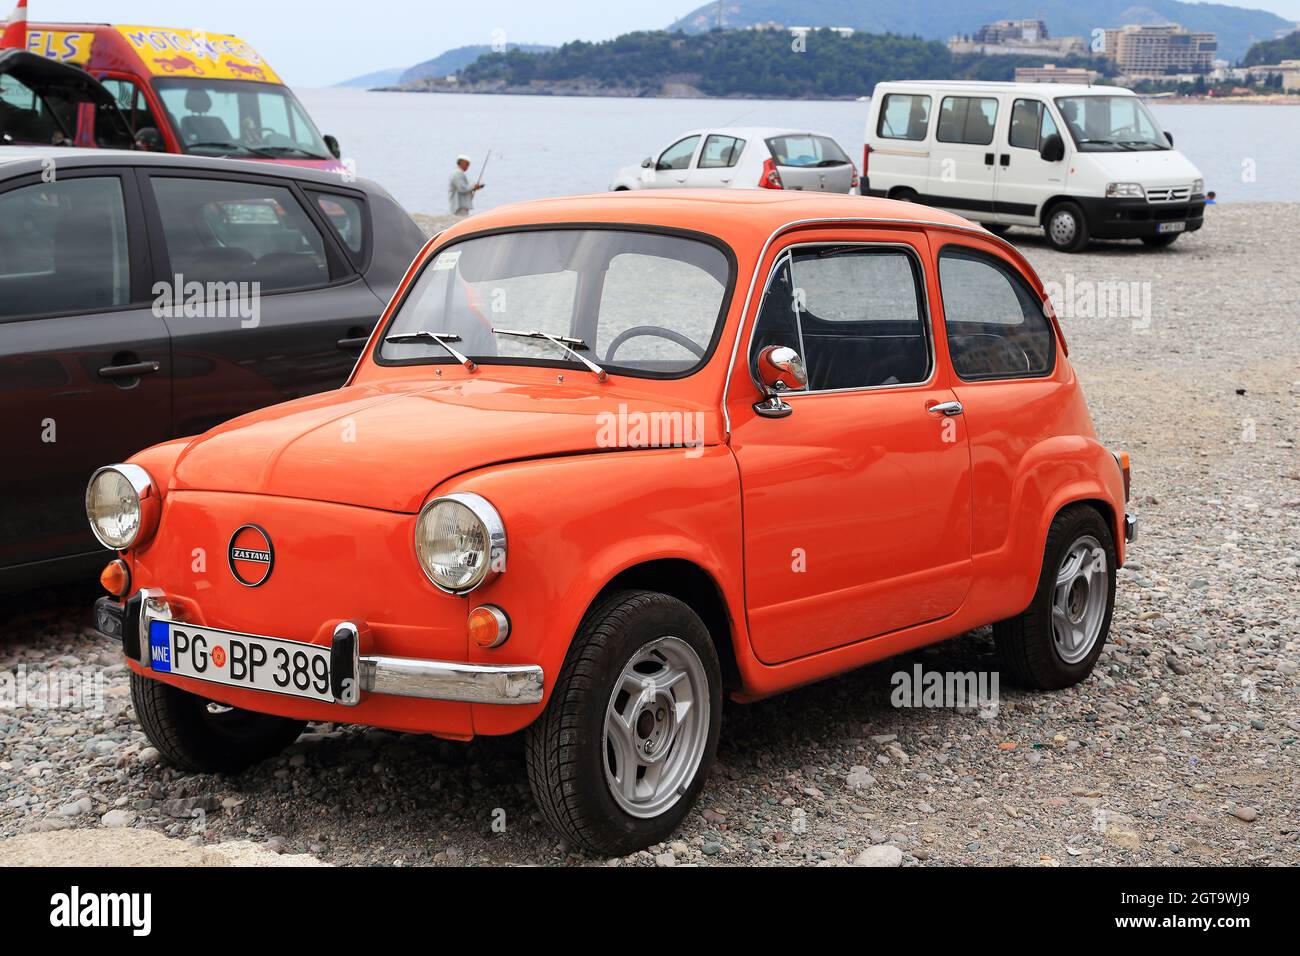 BECICI, MONTENEGRO - SEPTEMBER 9, 2013: This is the car Zastava 750L, which was superpopular and was produced in the former Yugoslavia in the 60-90s o Stock Photo